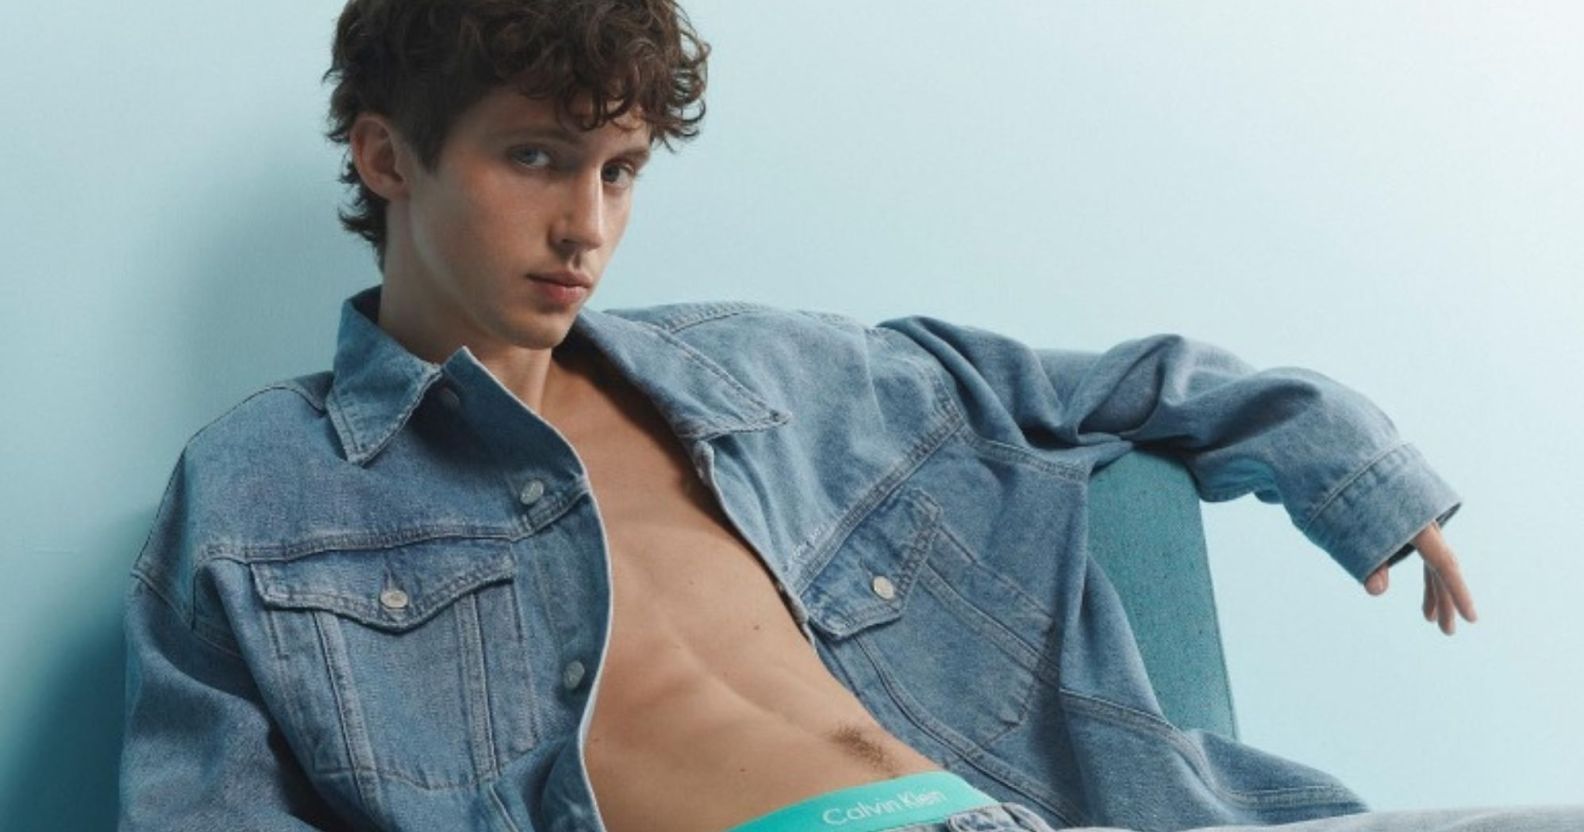 Troye Sivan stars in Calvin Klein's campaign collection for Sydney's WorldPride.